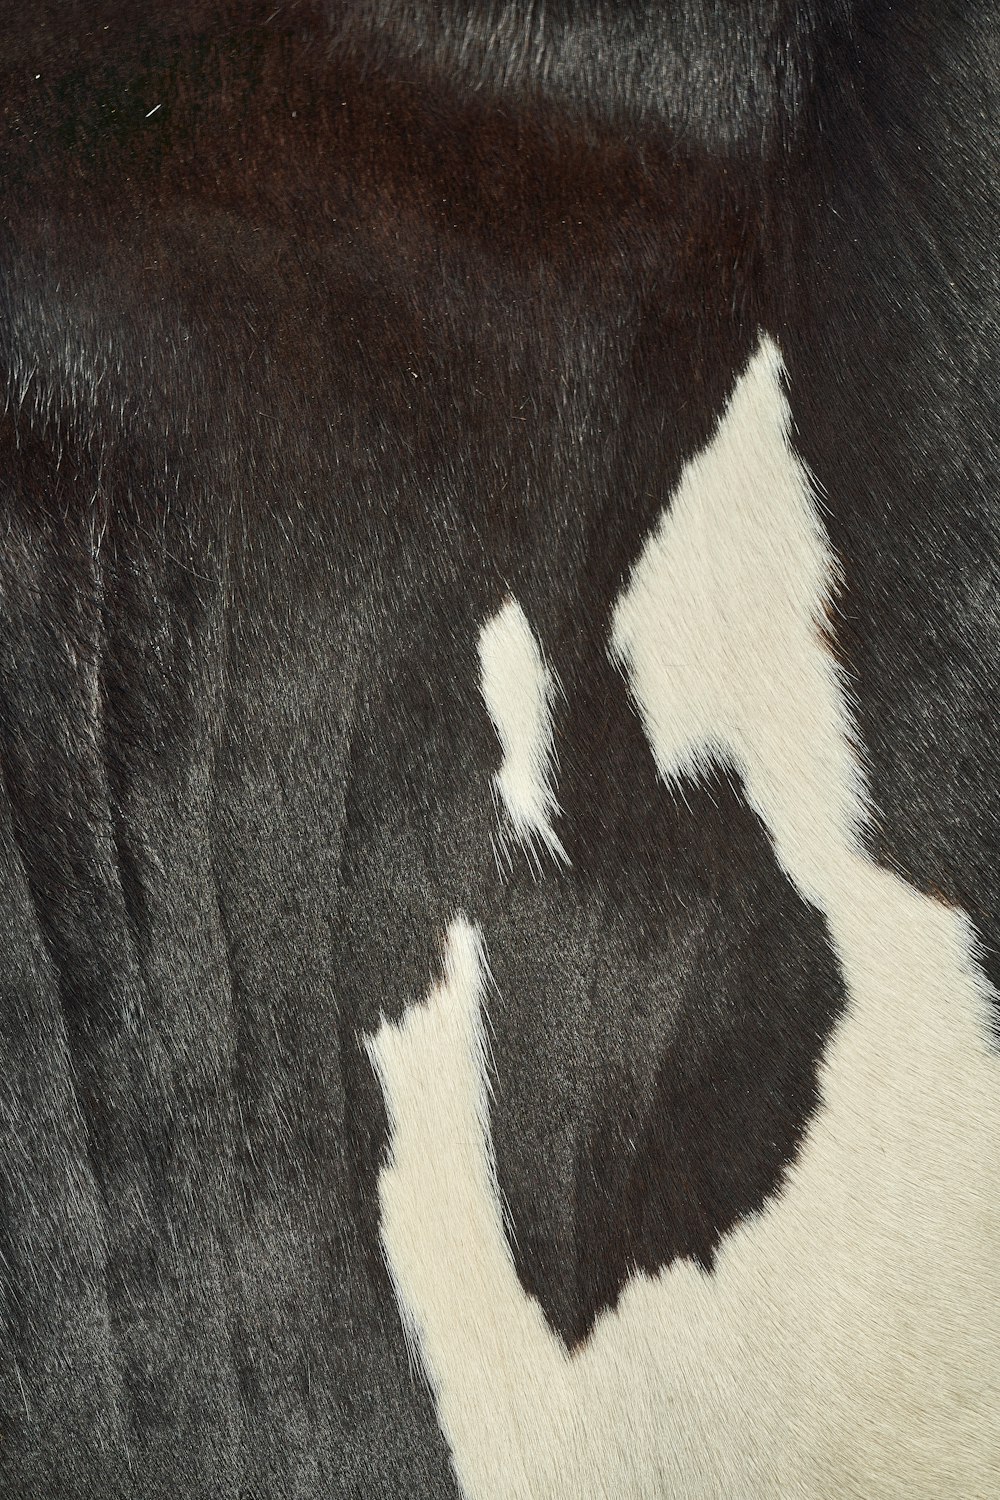 a close up of a cow's black and white fur